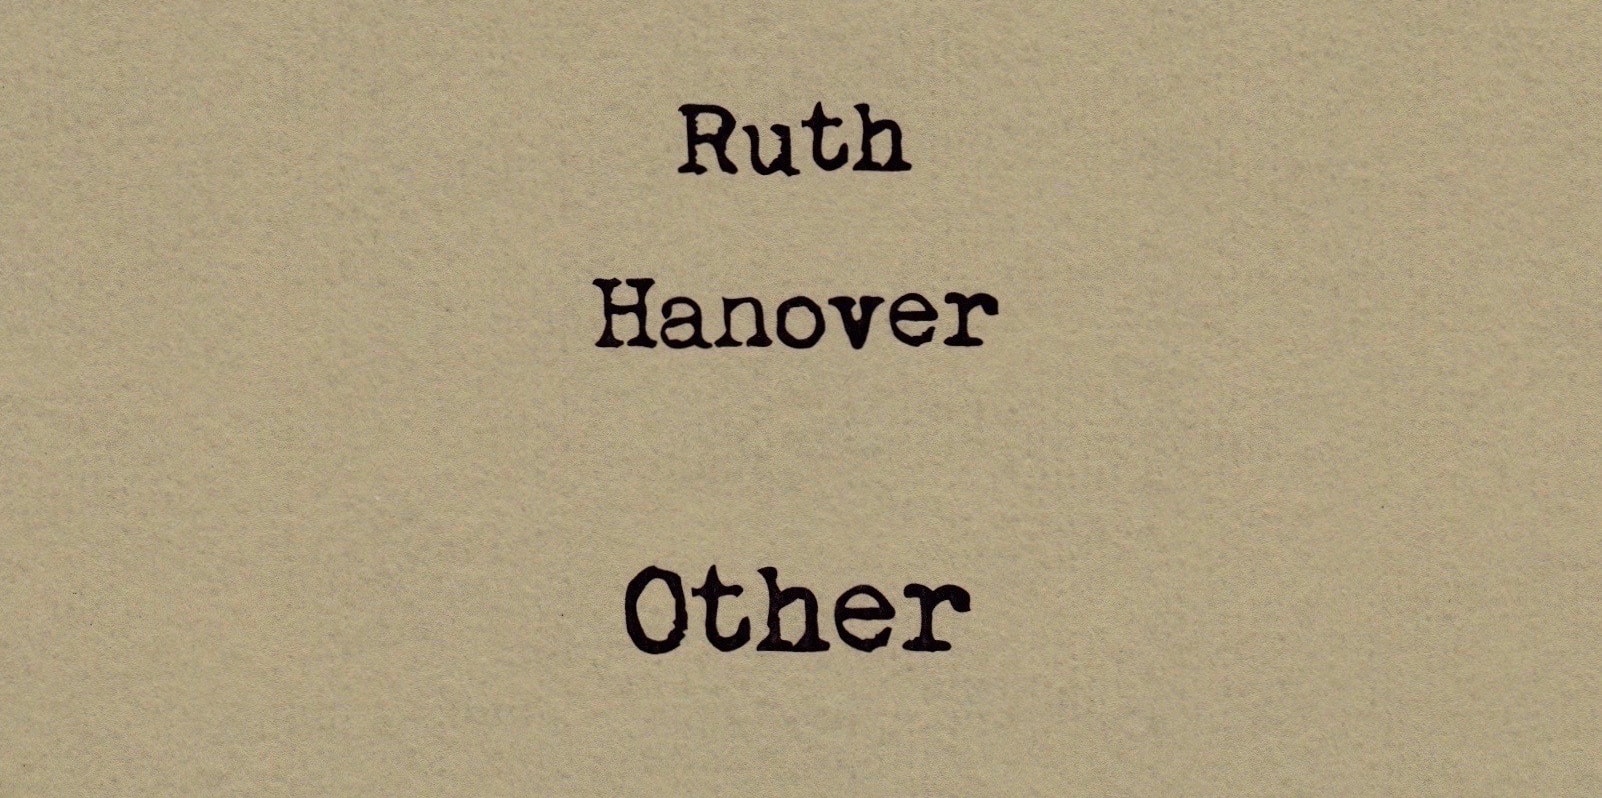 Other by Ruth Hanover